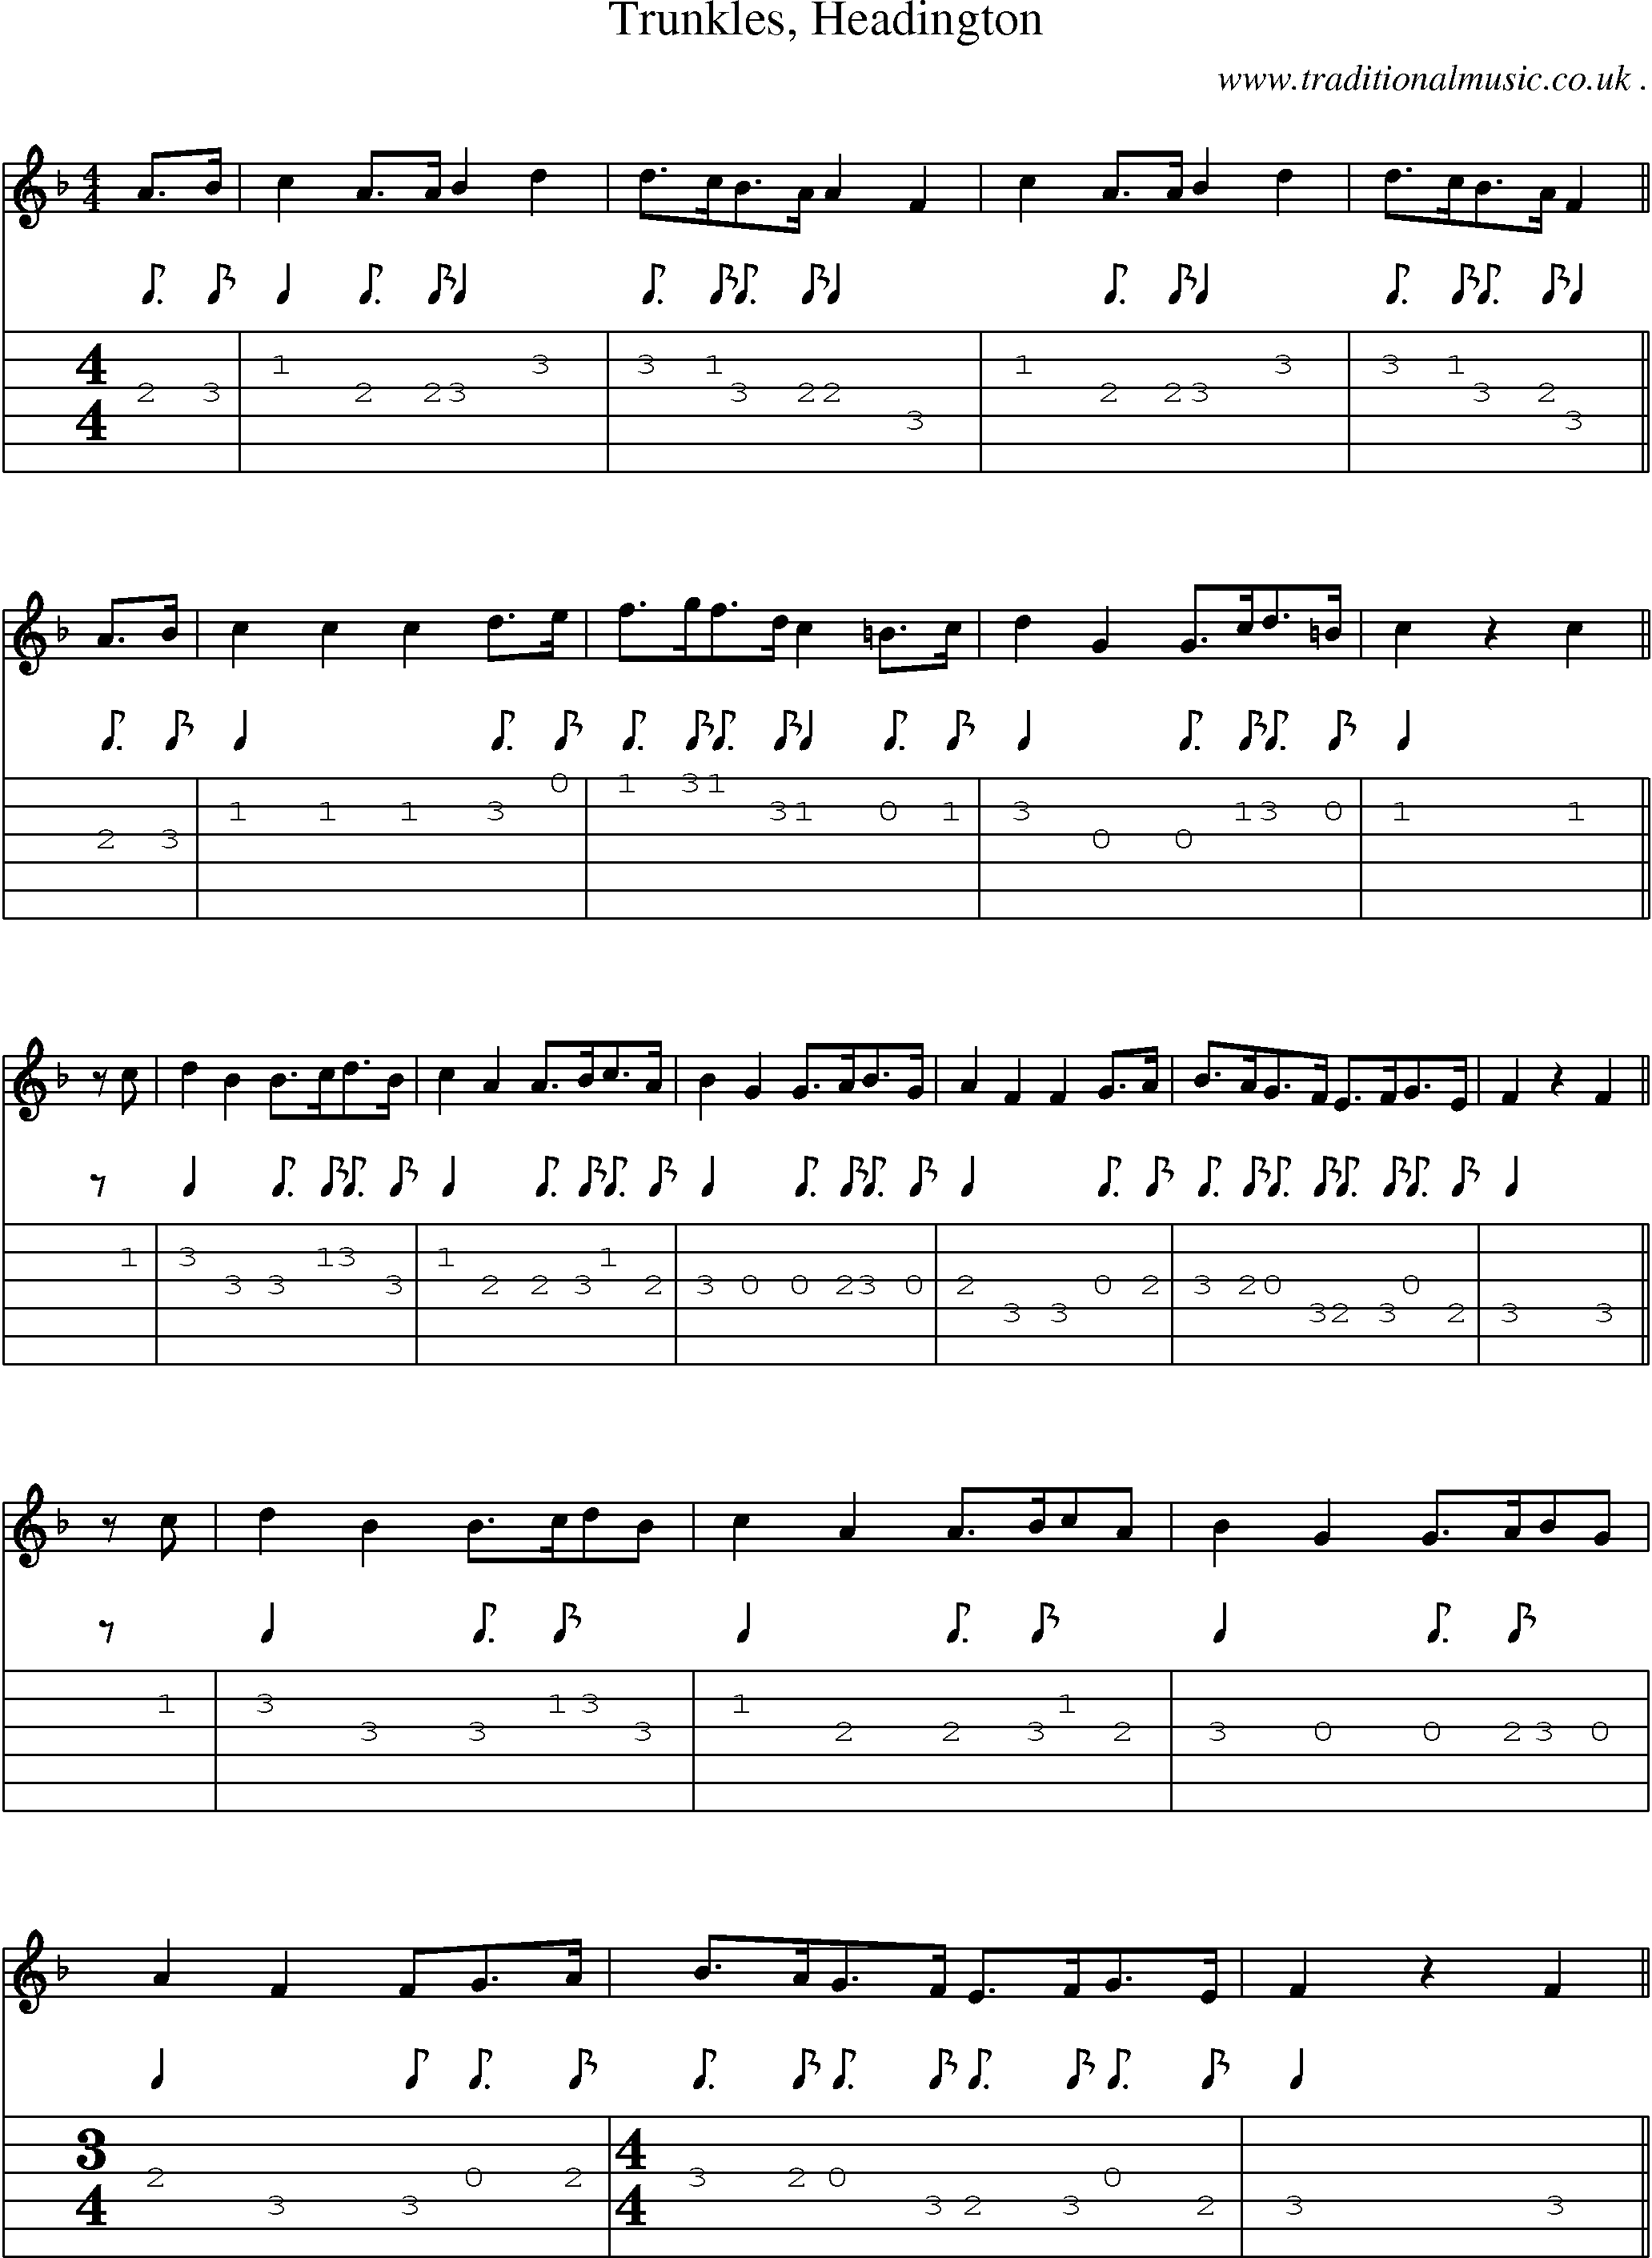 Sheet-Music and Guitar Tabs for Trunkles Headington